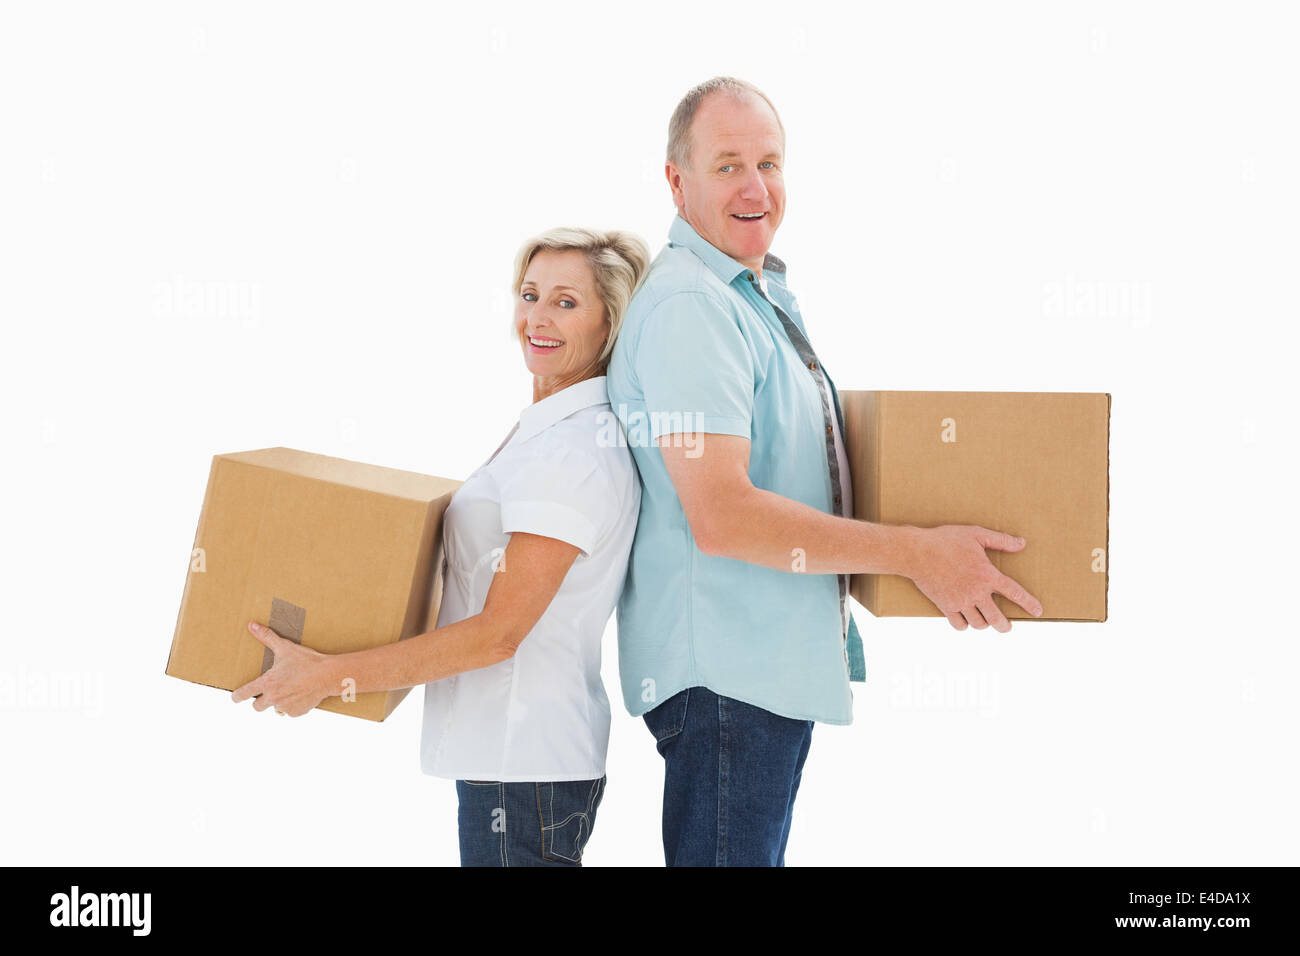 Happy older couple holding moving boxes Banque D'Images